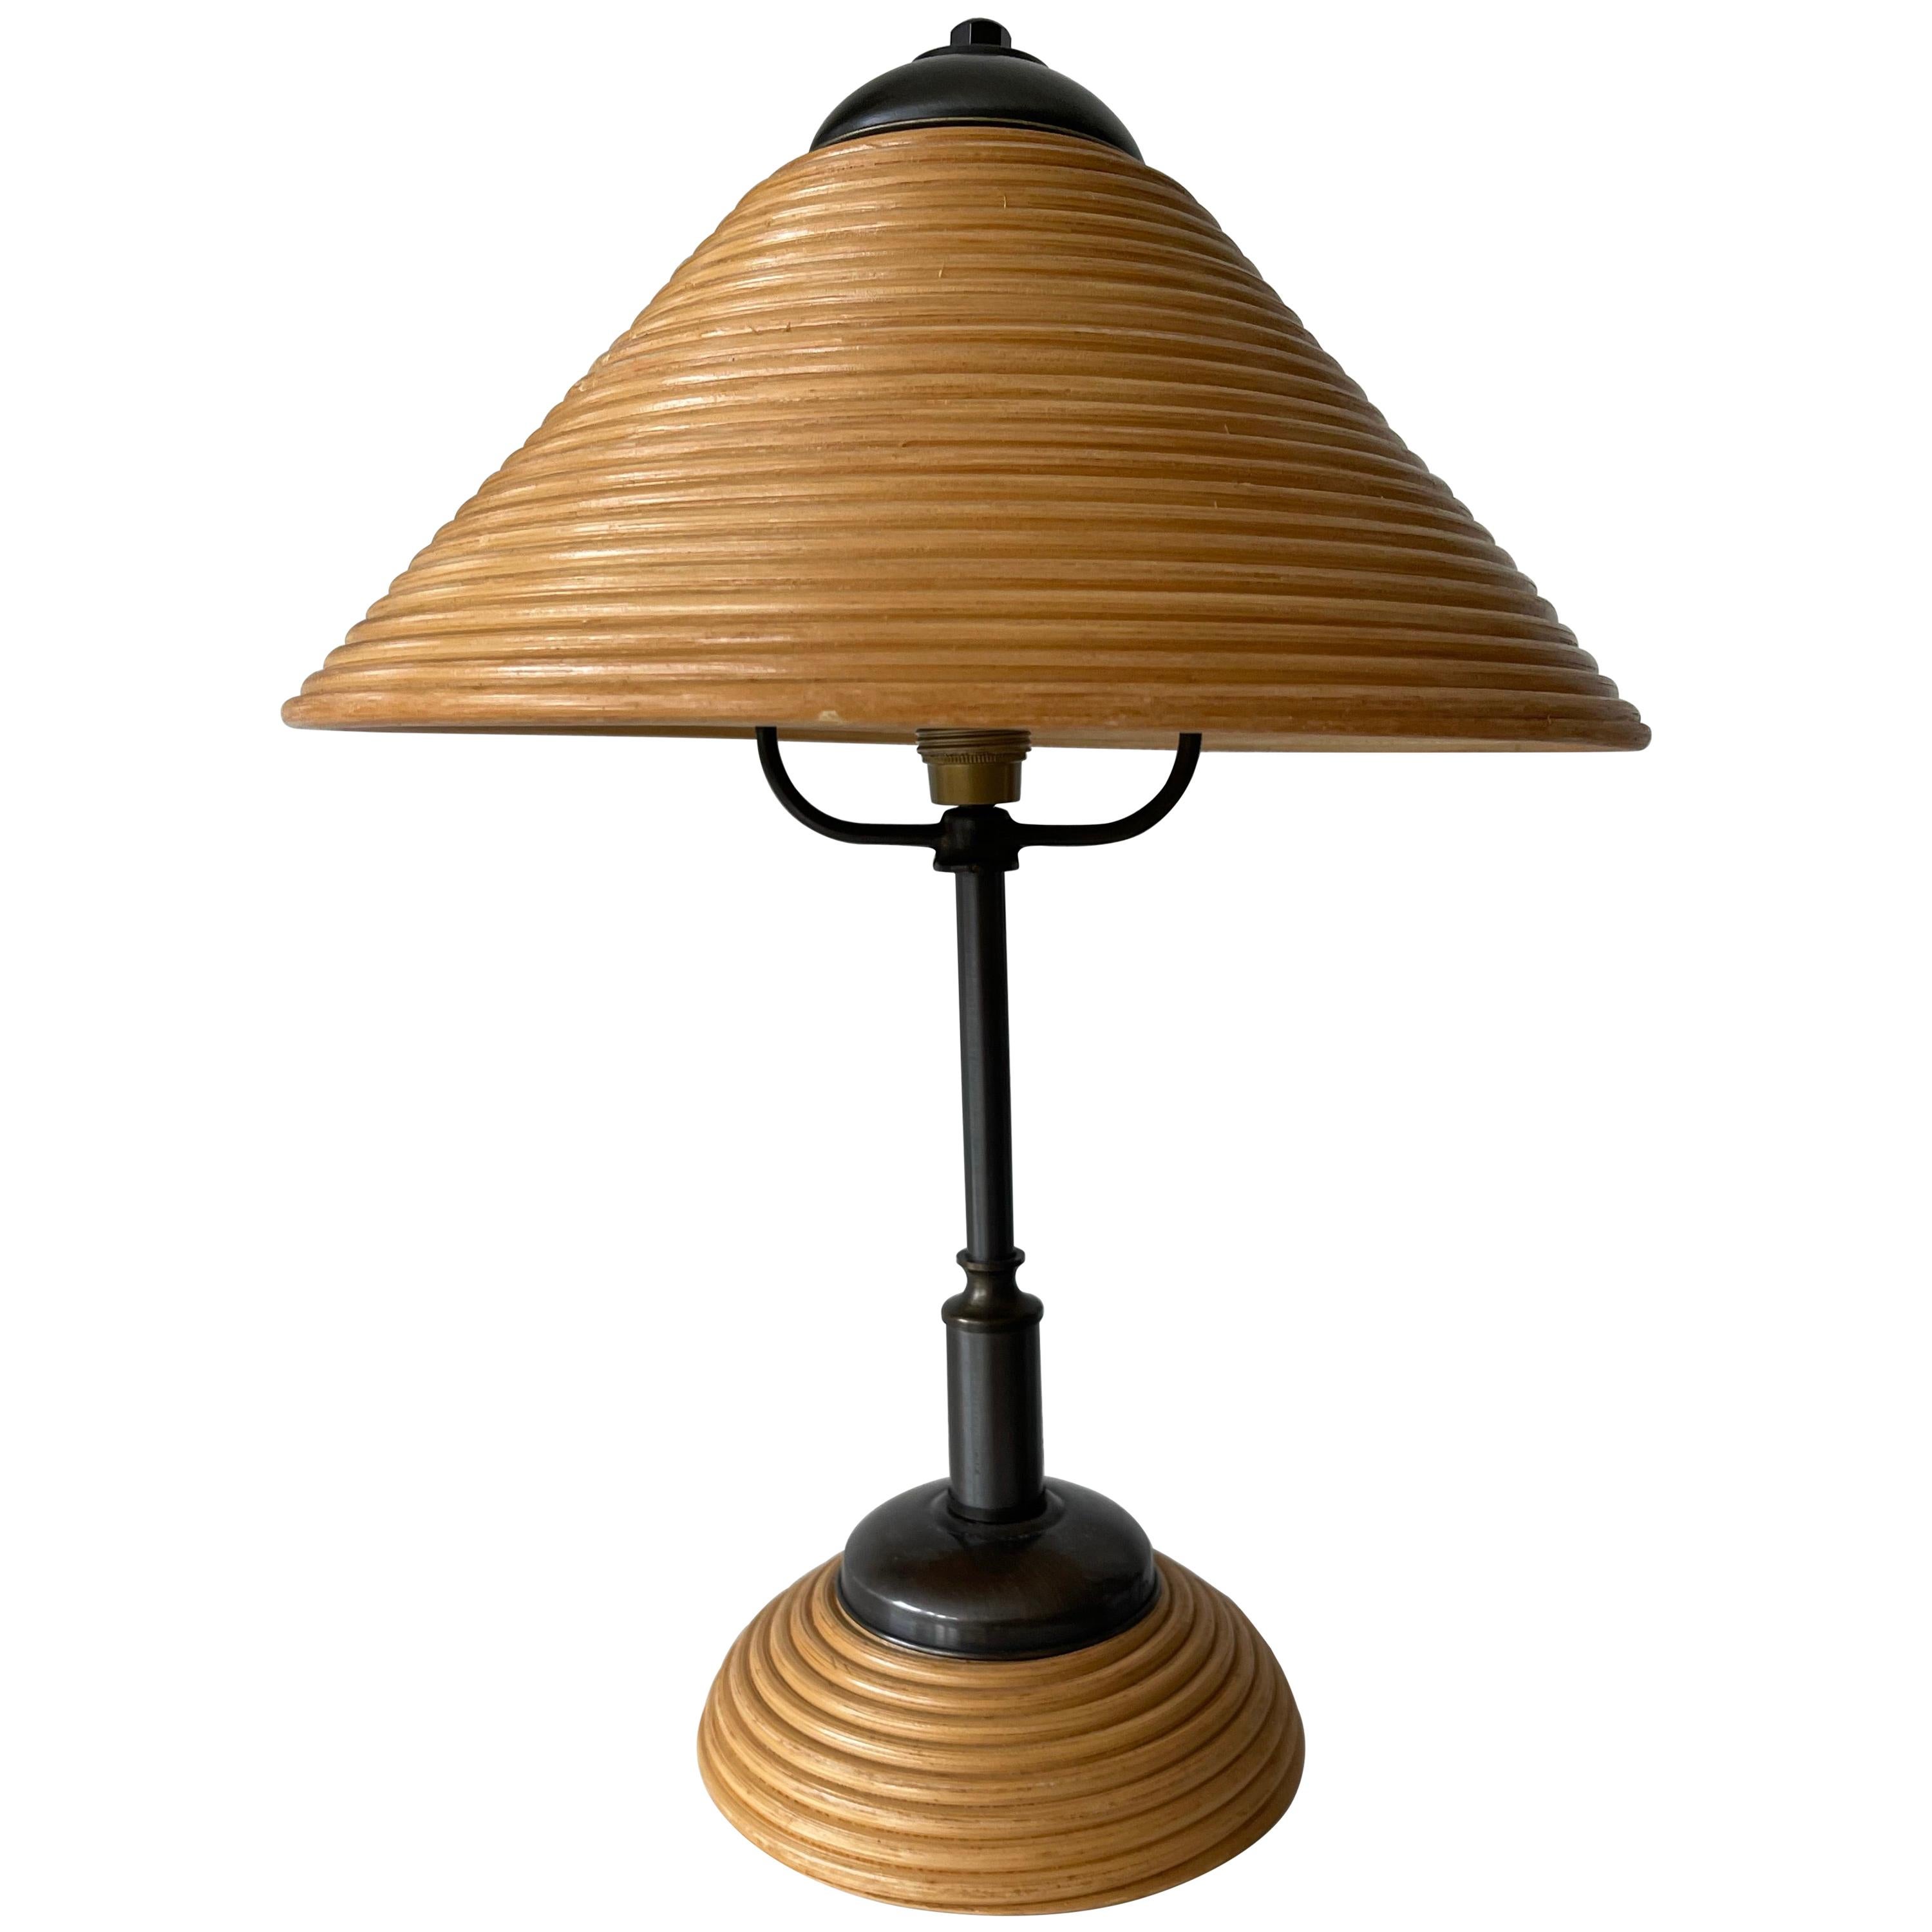 Rare & Stylish, Handcrafted Mid-Century Modern Rattan & Brass Table or Desk Lamp